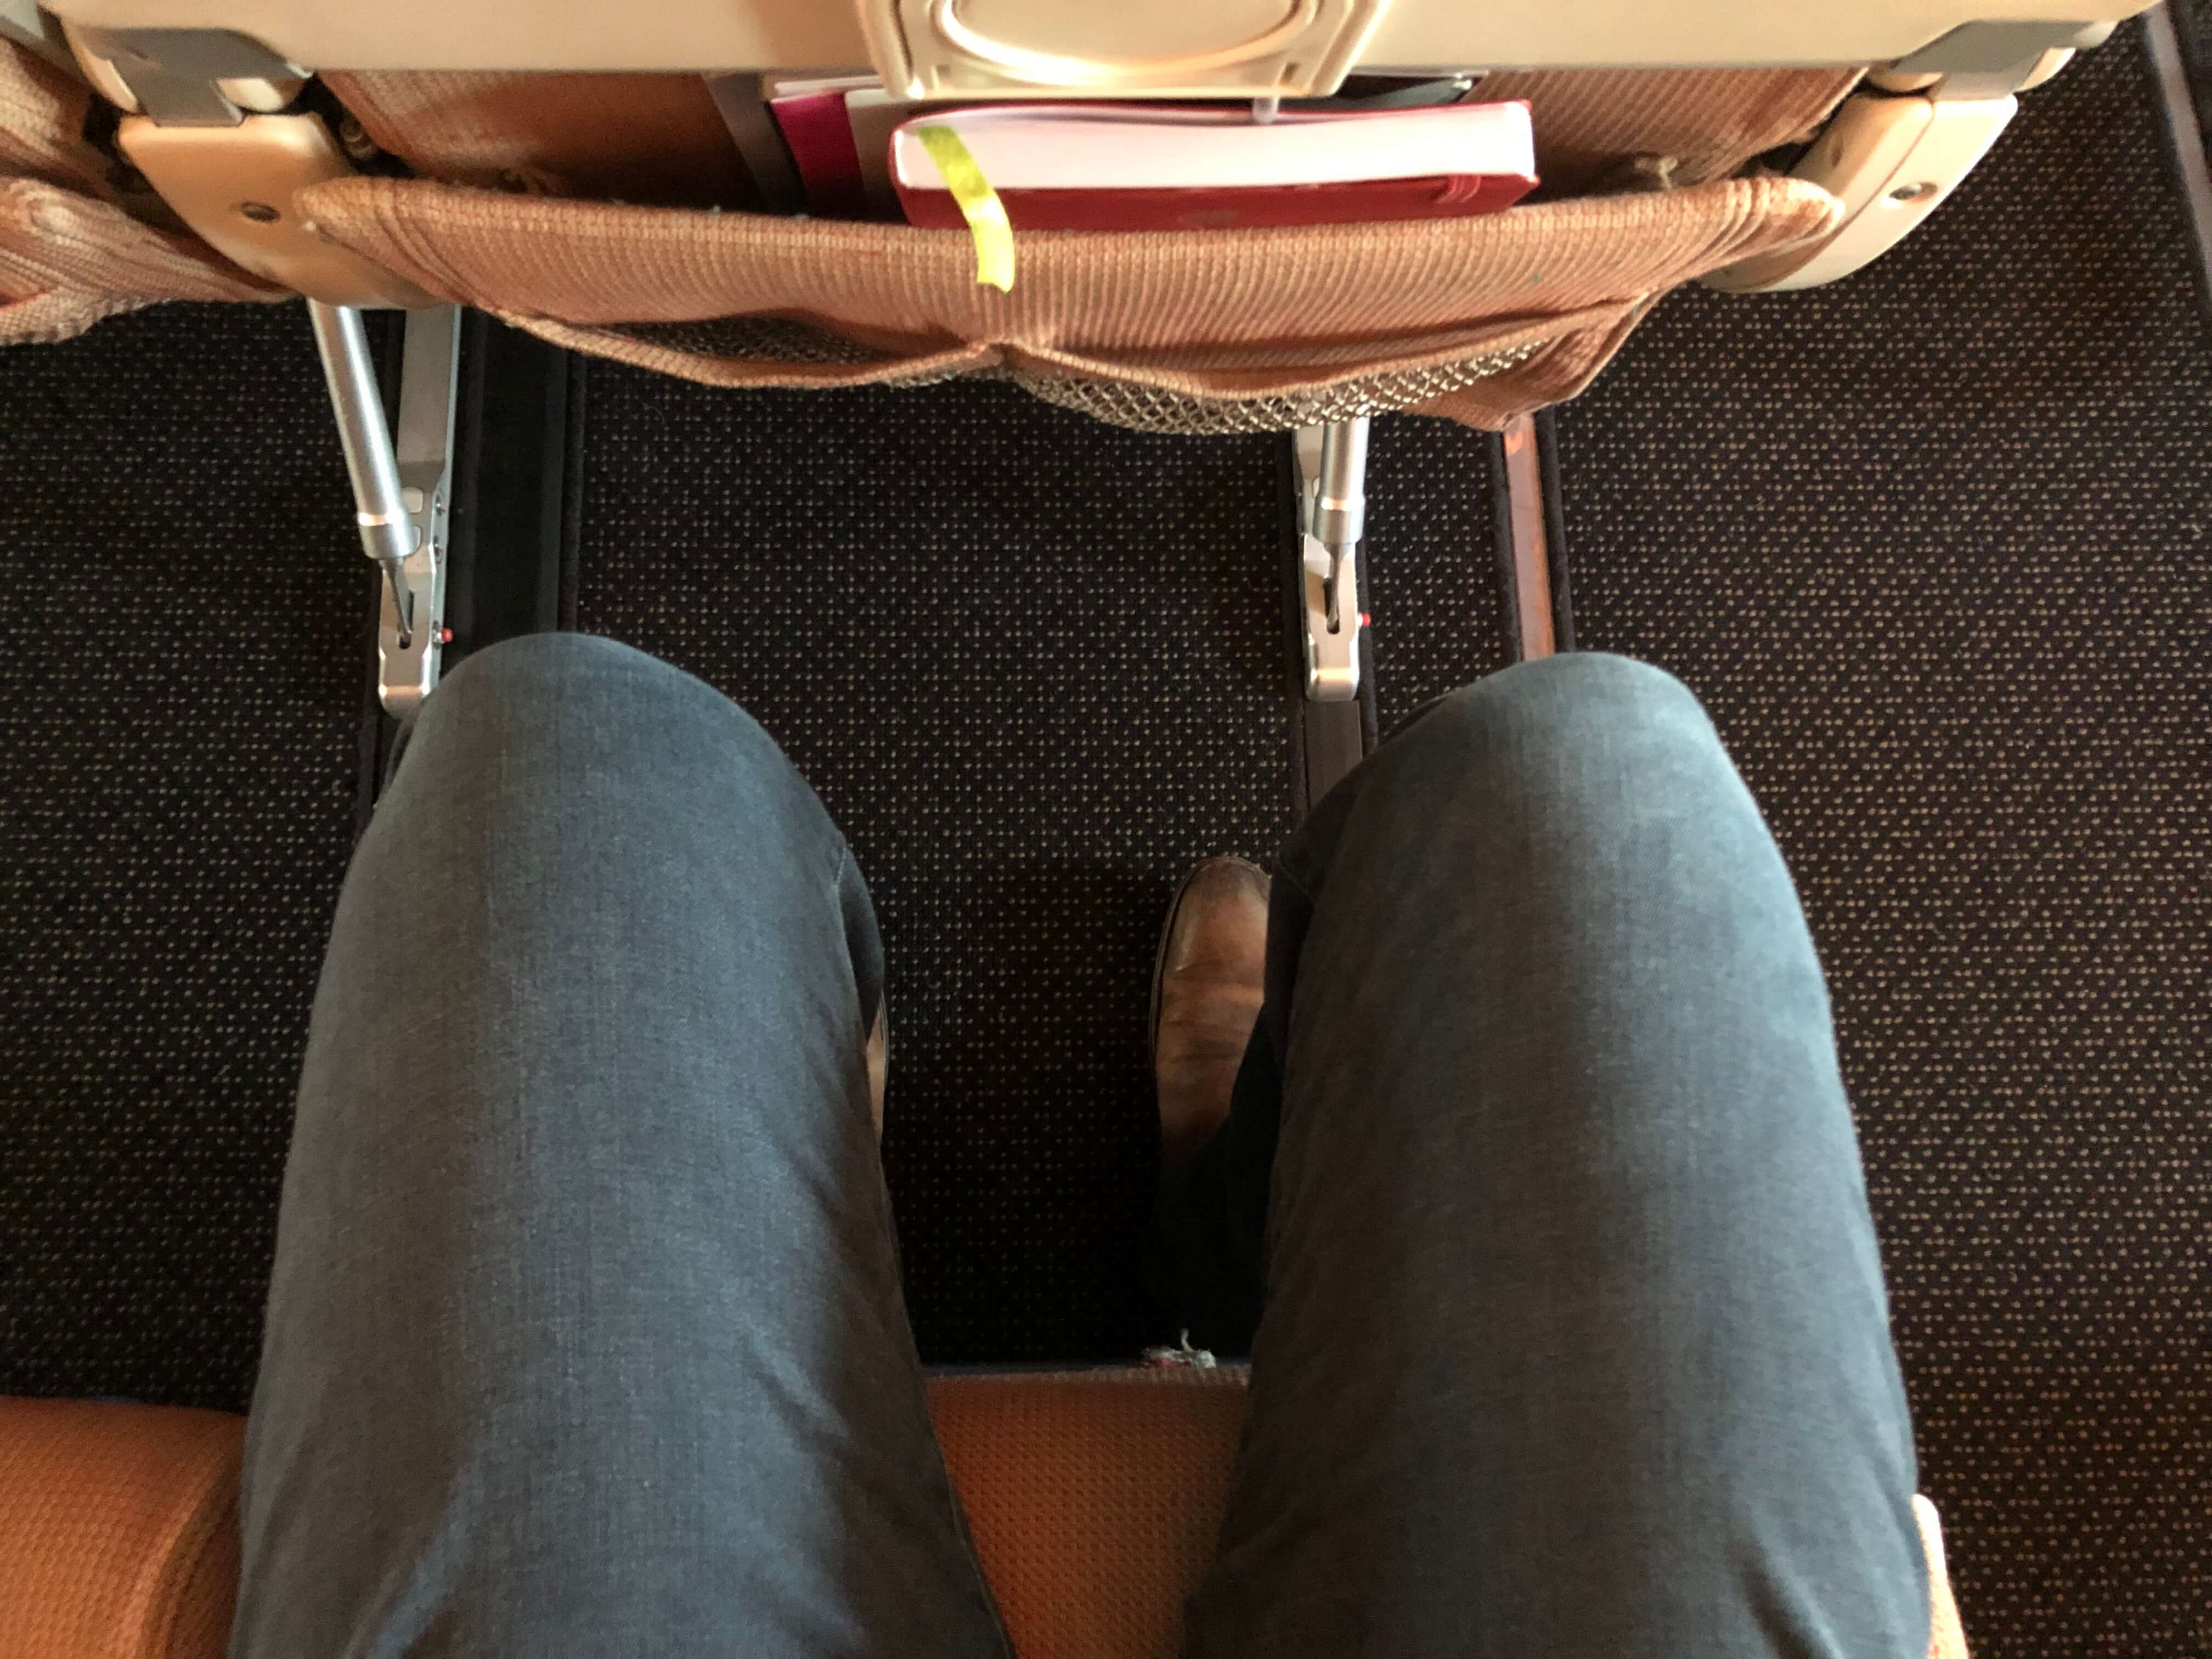 The five inches of extra legroom in Etihad Economy Space